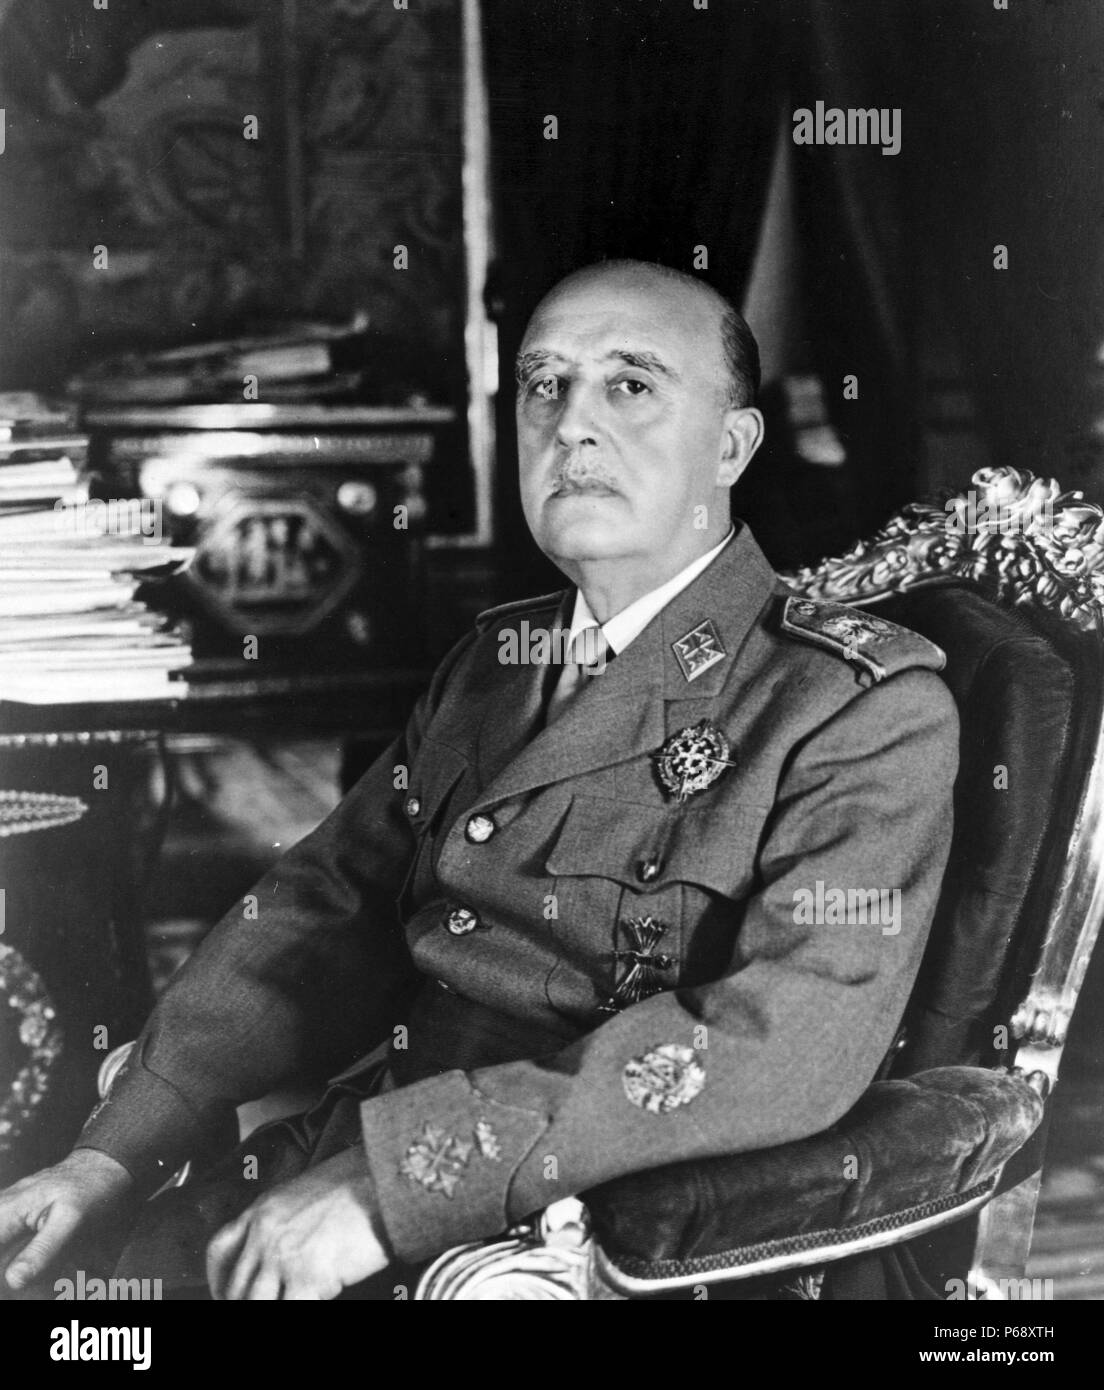 Francisco Franco Bahamonde (1892 – 1975) dictator of Spain from 1939 to his death in 1975 Stock Photo